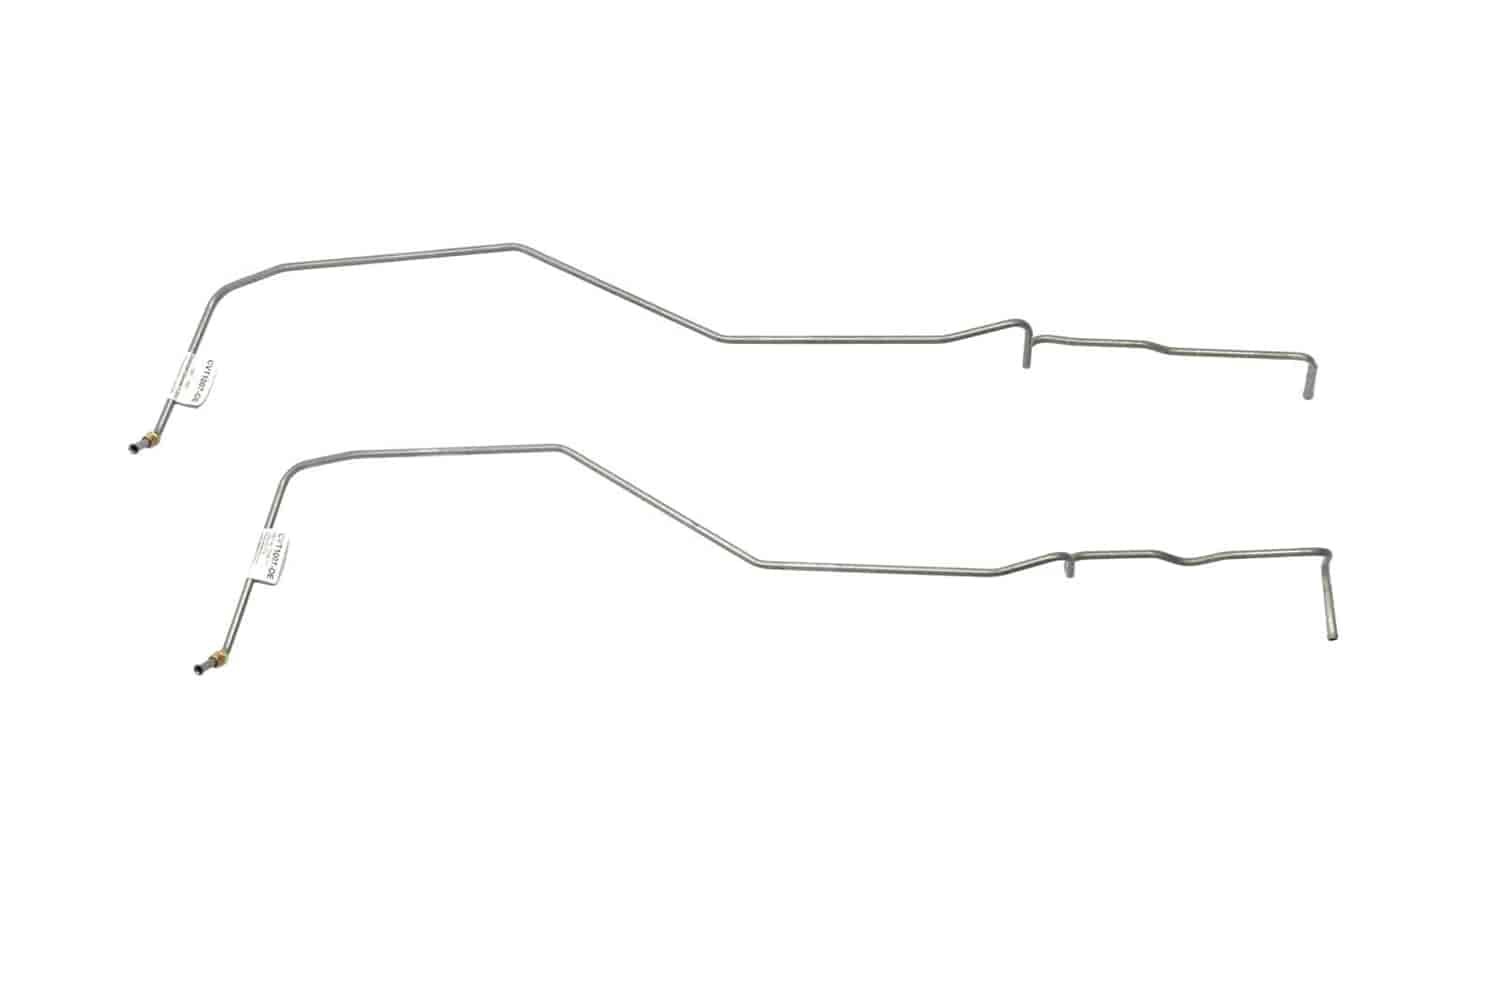 Chevrolet Corvette Transmission Lines Sold In Pairs -1981 1982